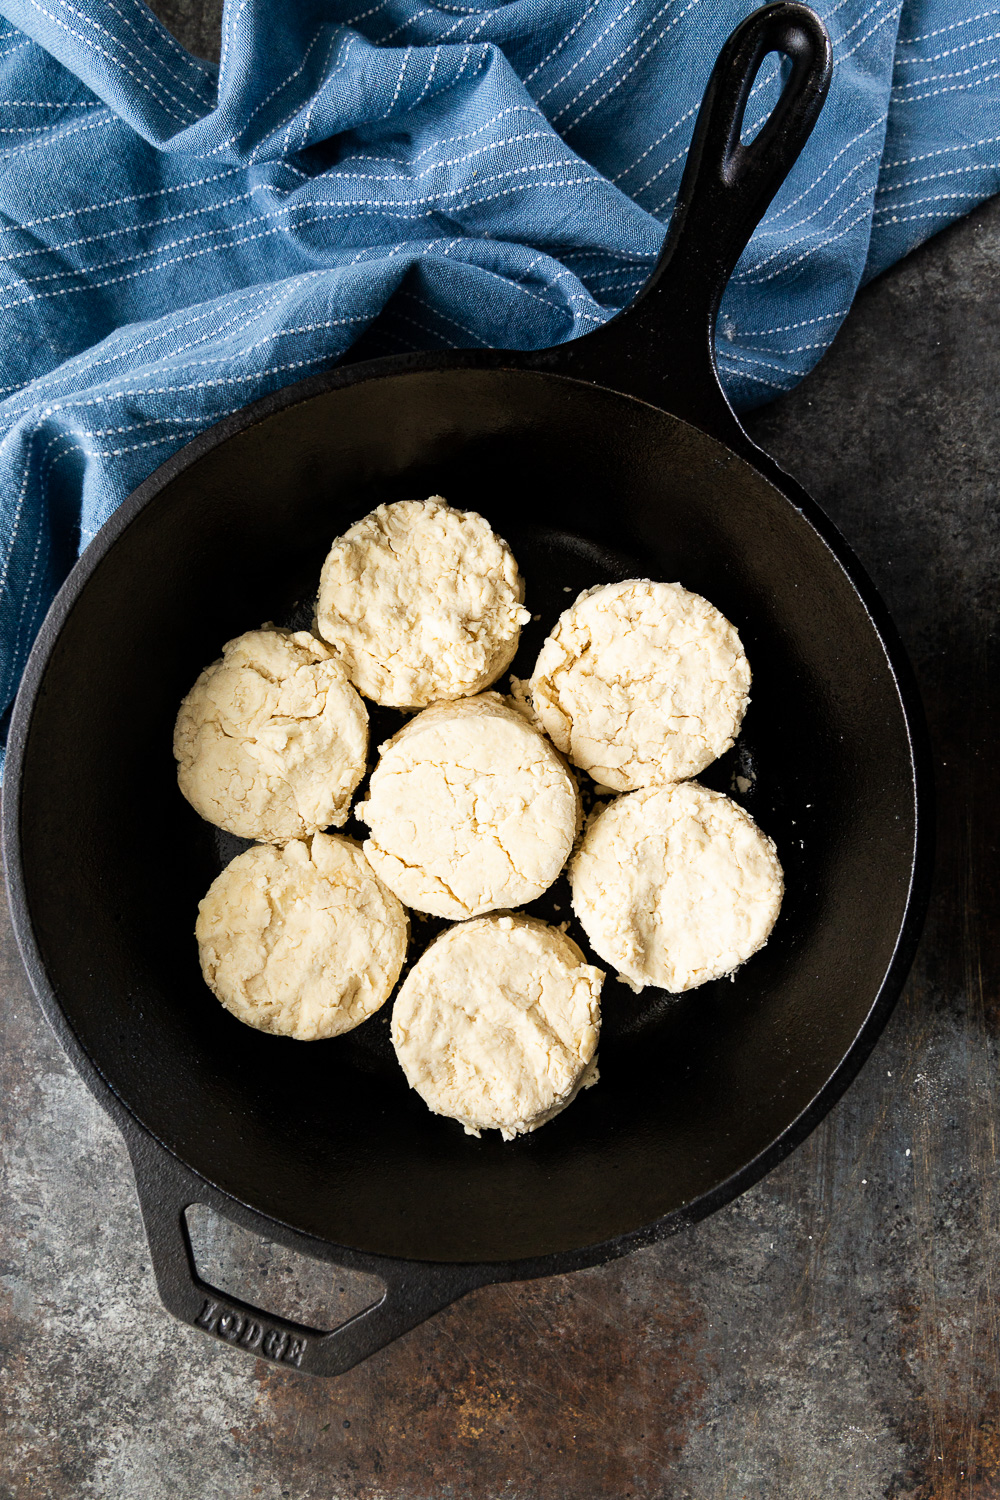 Making buttermilk biscuits from scratch with only 6 ingredients.